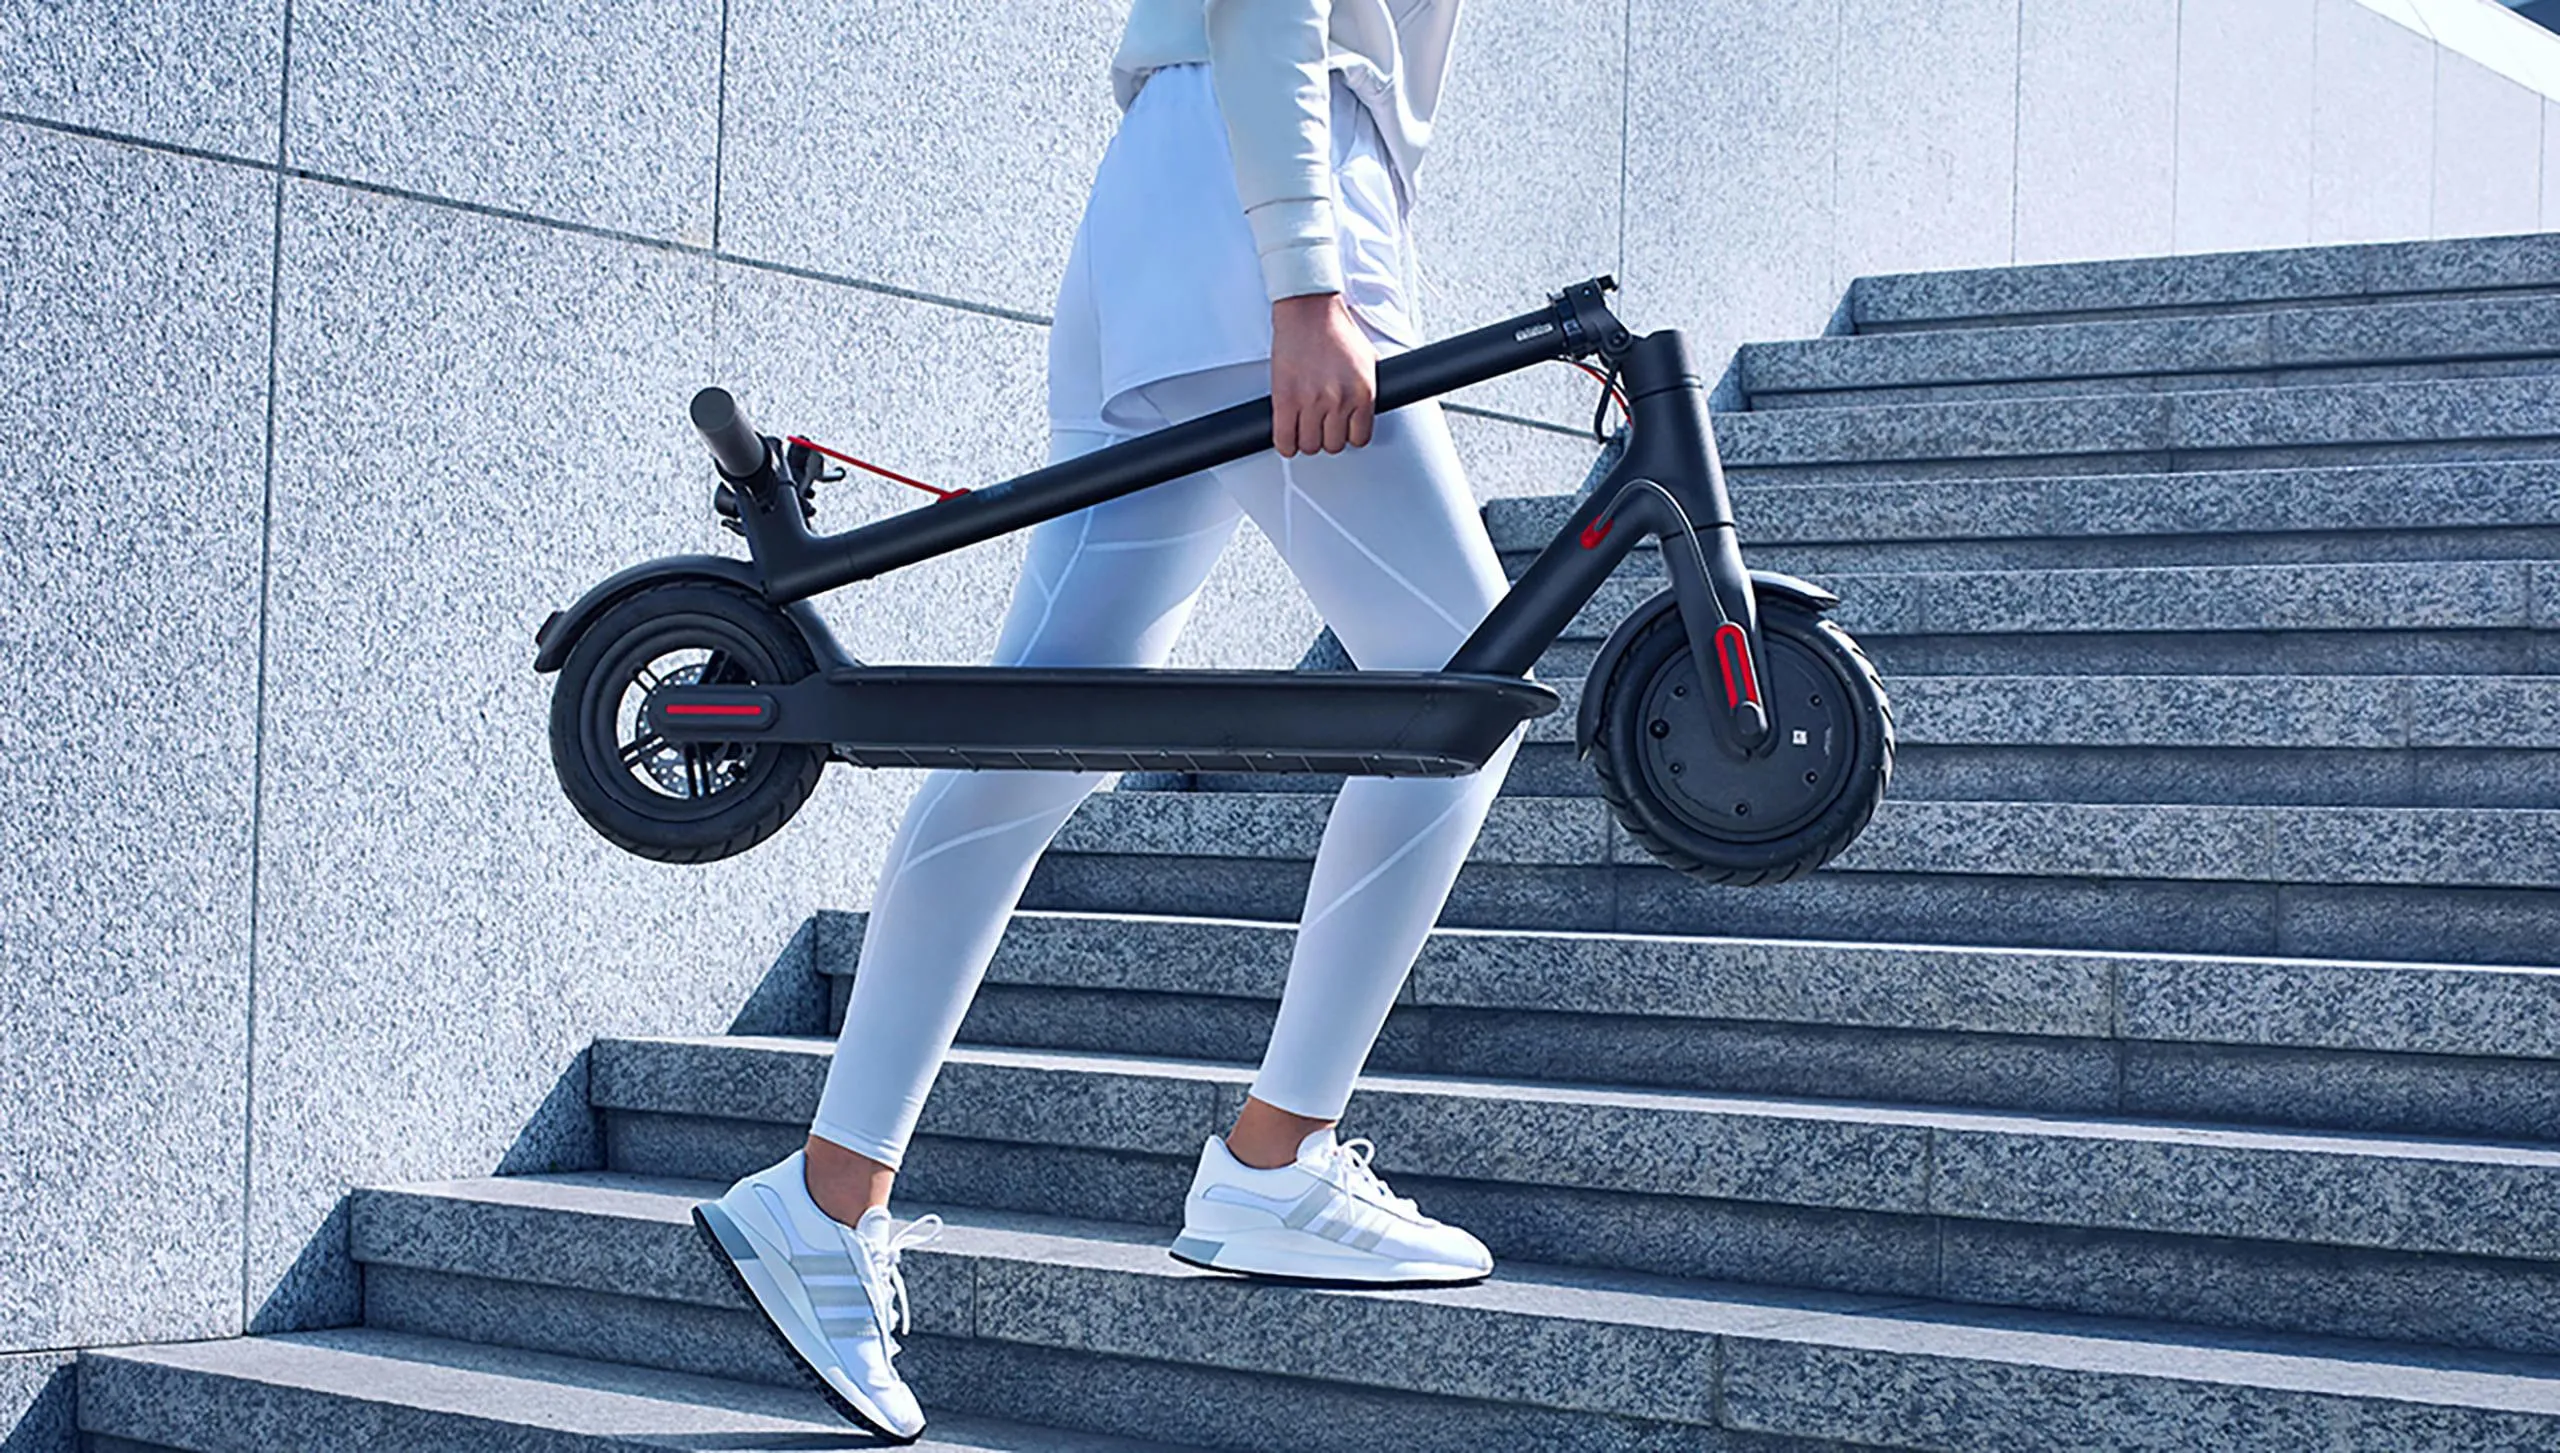 Электросамокат Xiaomi Electric Scooter 1S